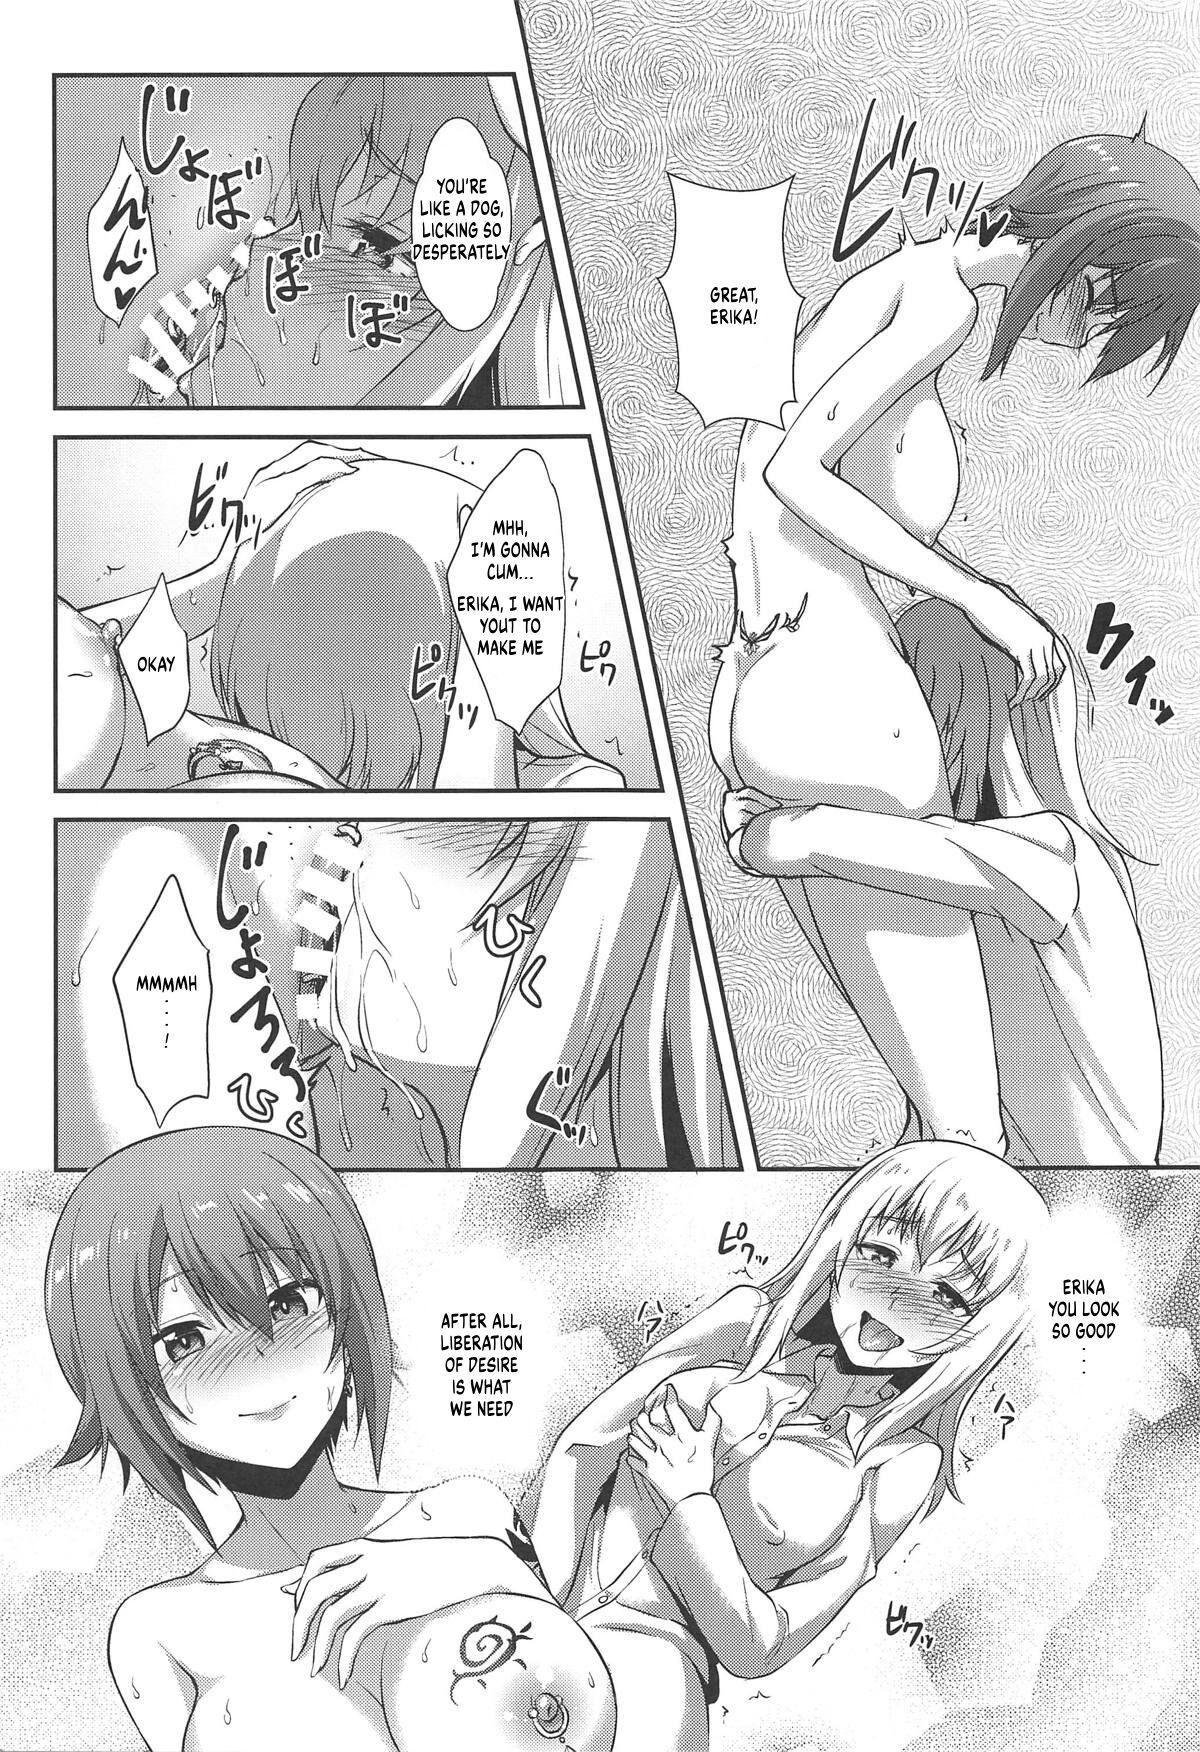 Hardcoresex The Way How a Matriarch is Brought Up - Maho's Case, Bottom - Girls und panzer Sextoys - Page 11